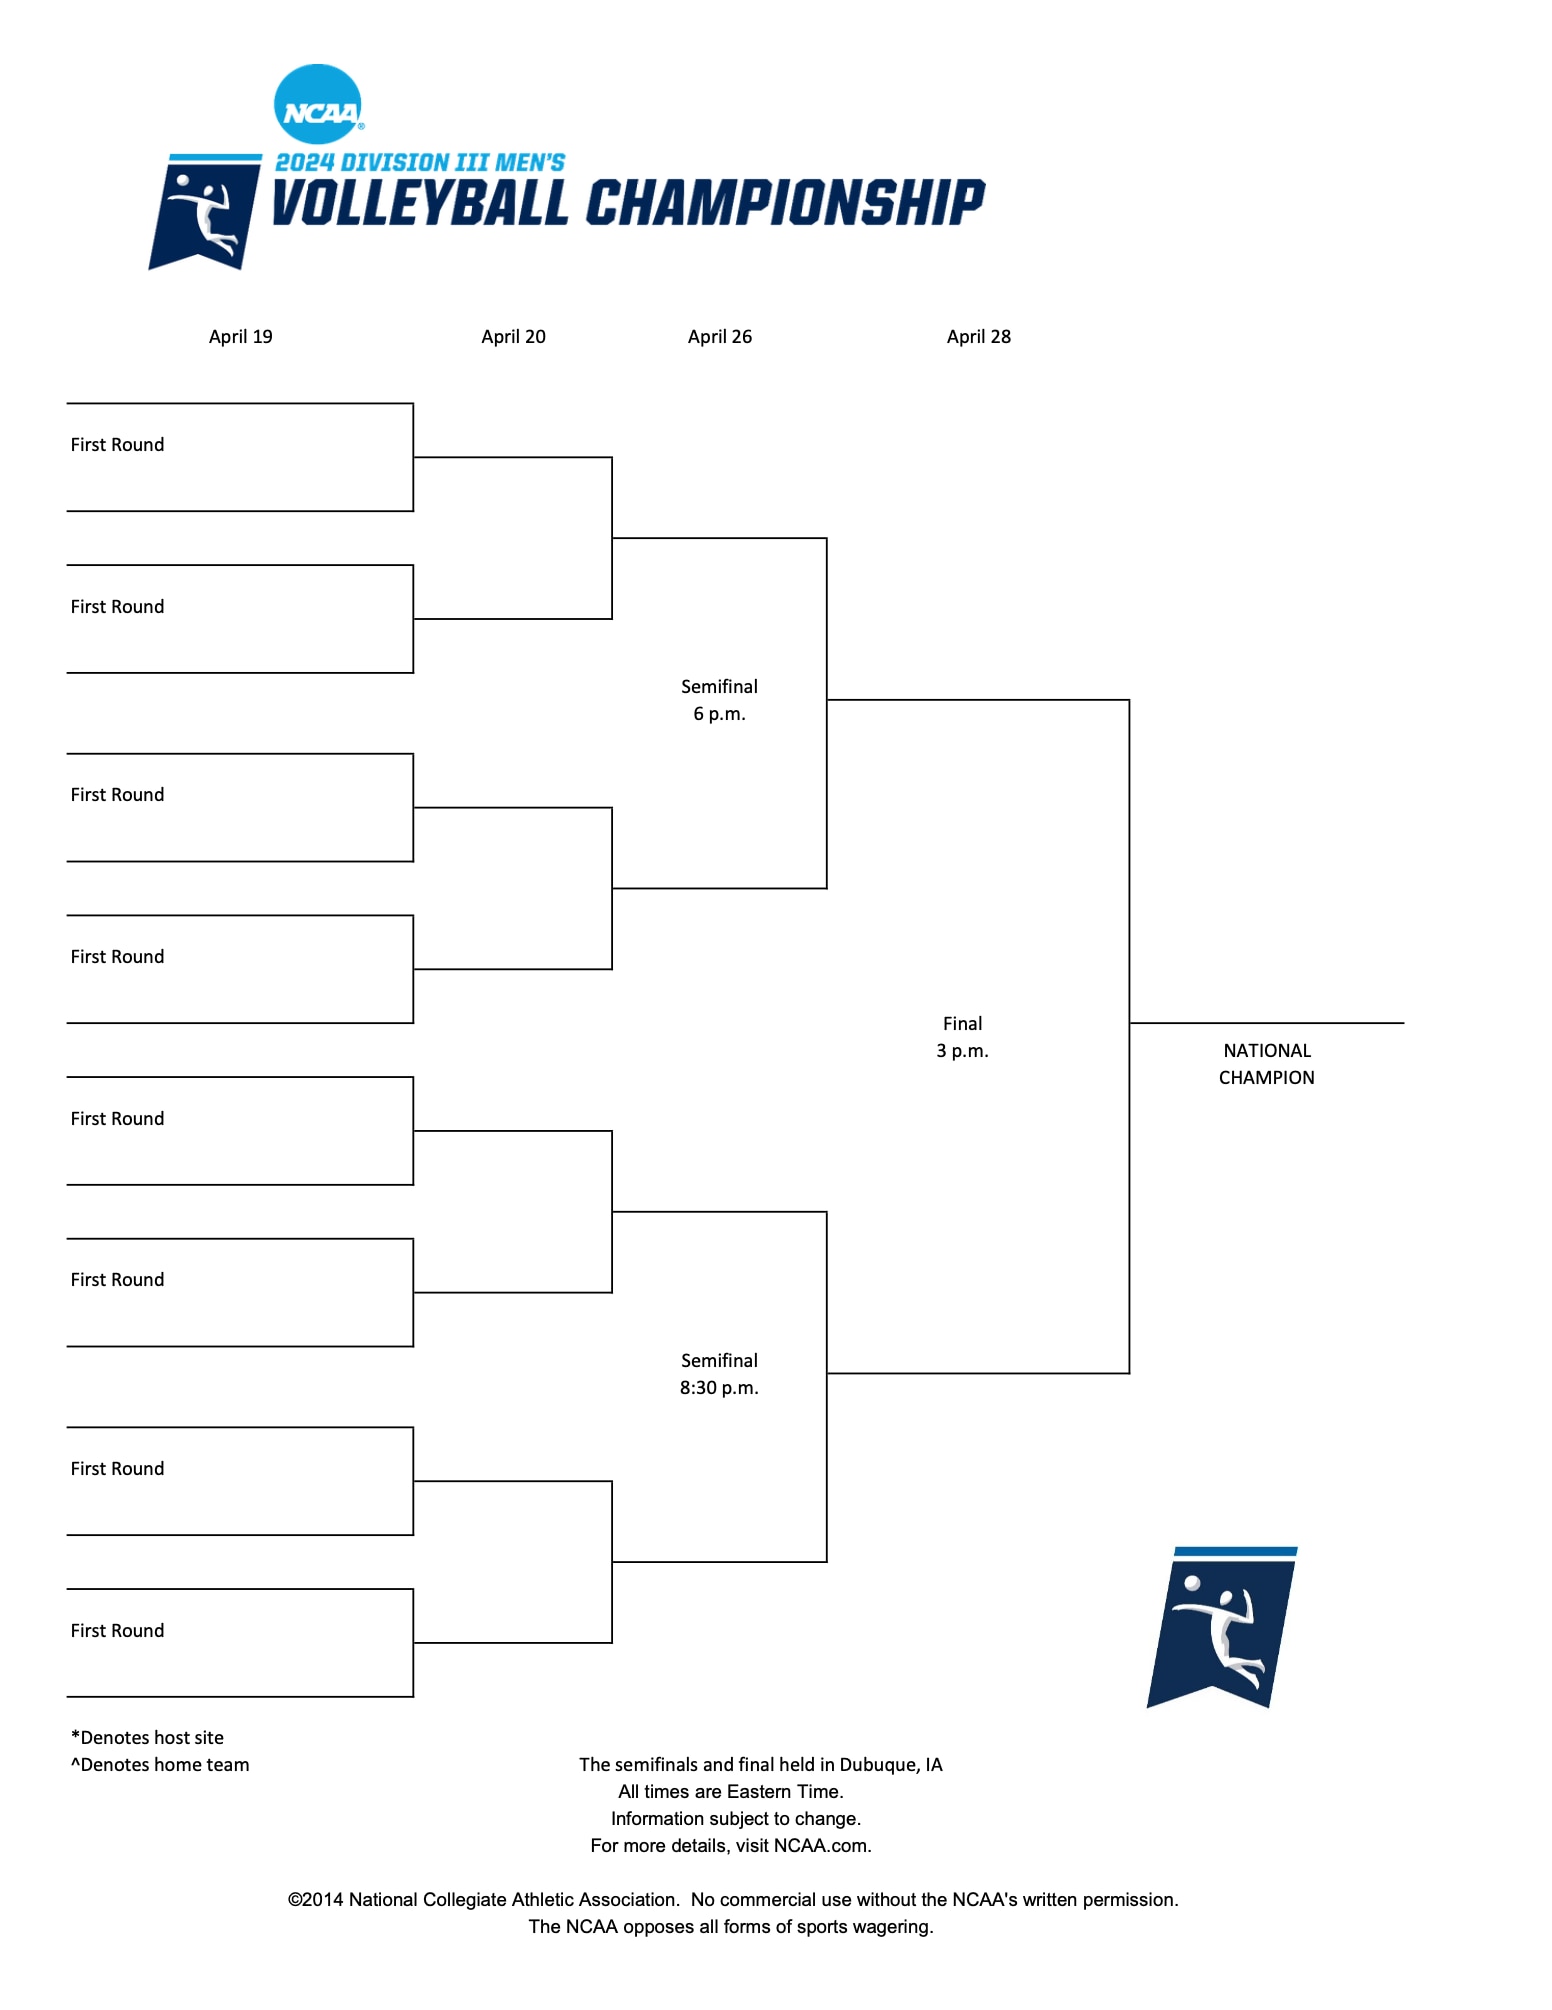 Image of the DIII men's volleyball bracket